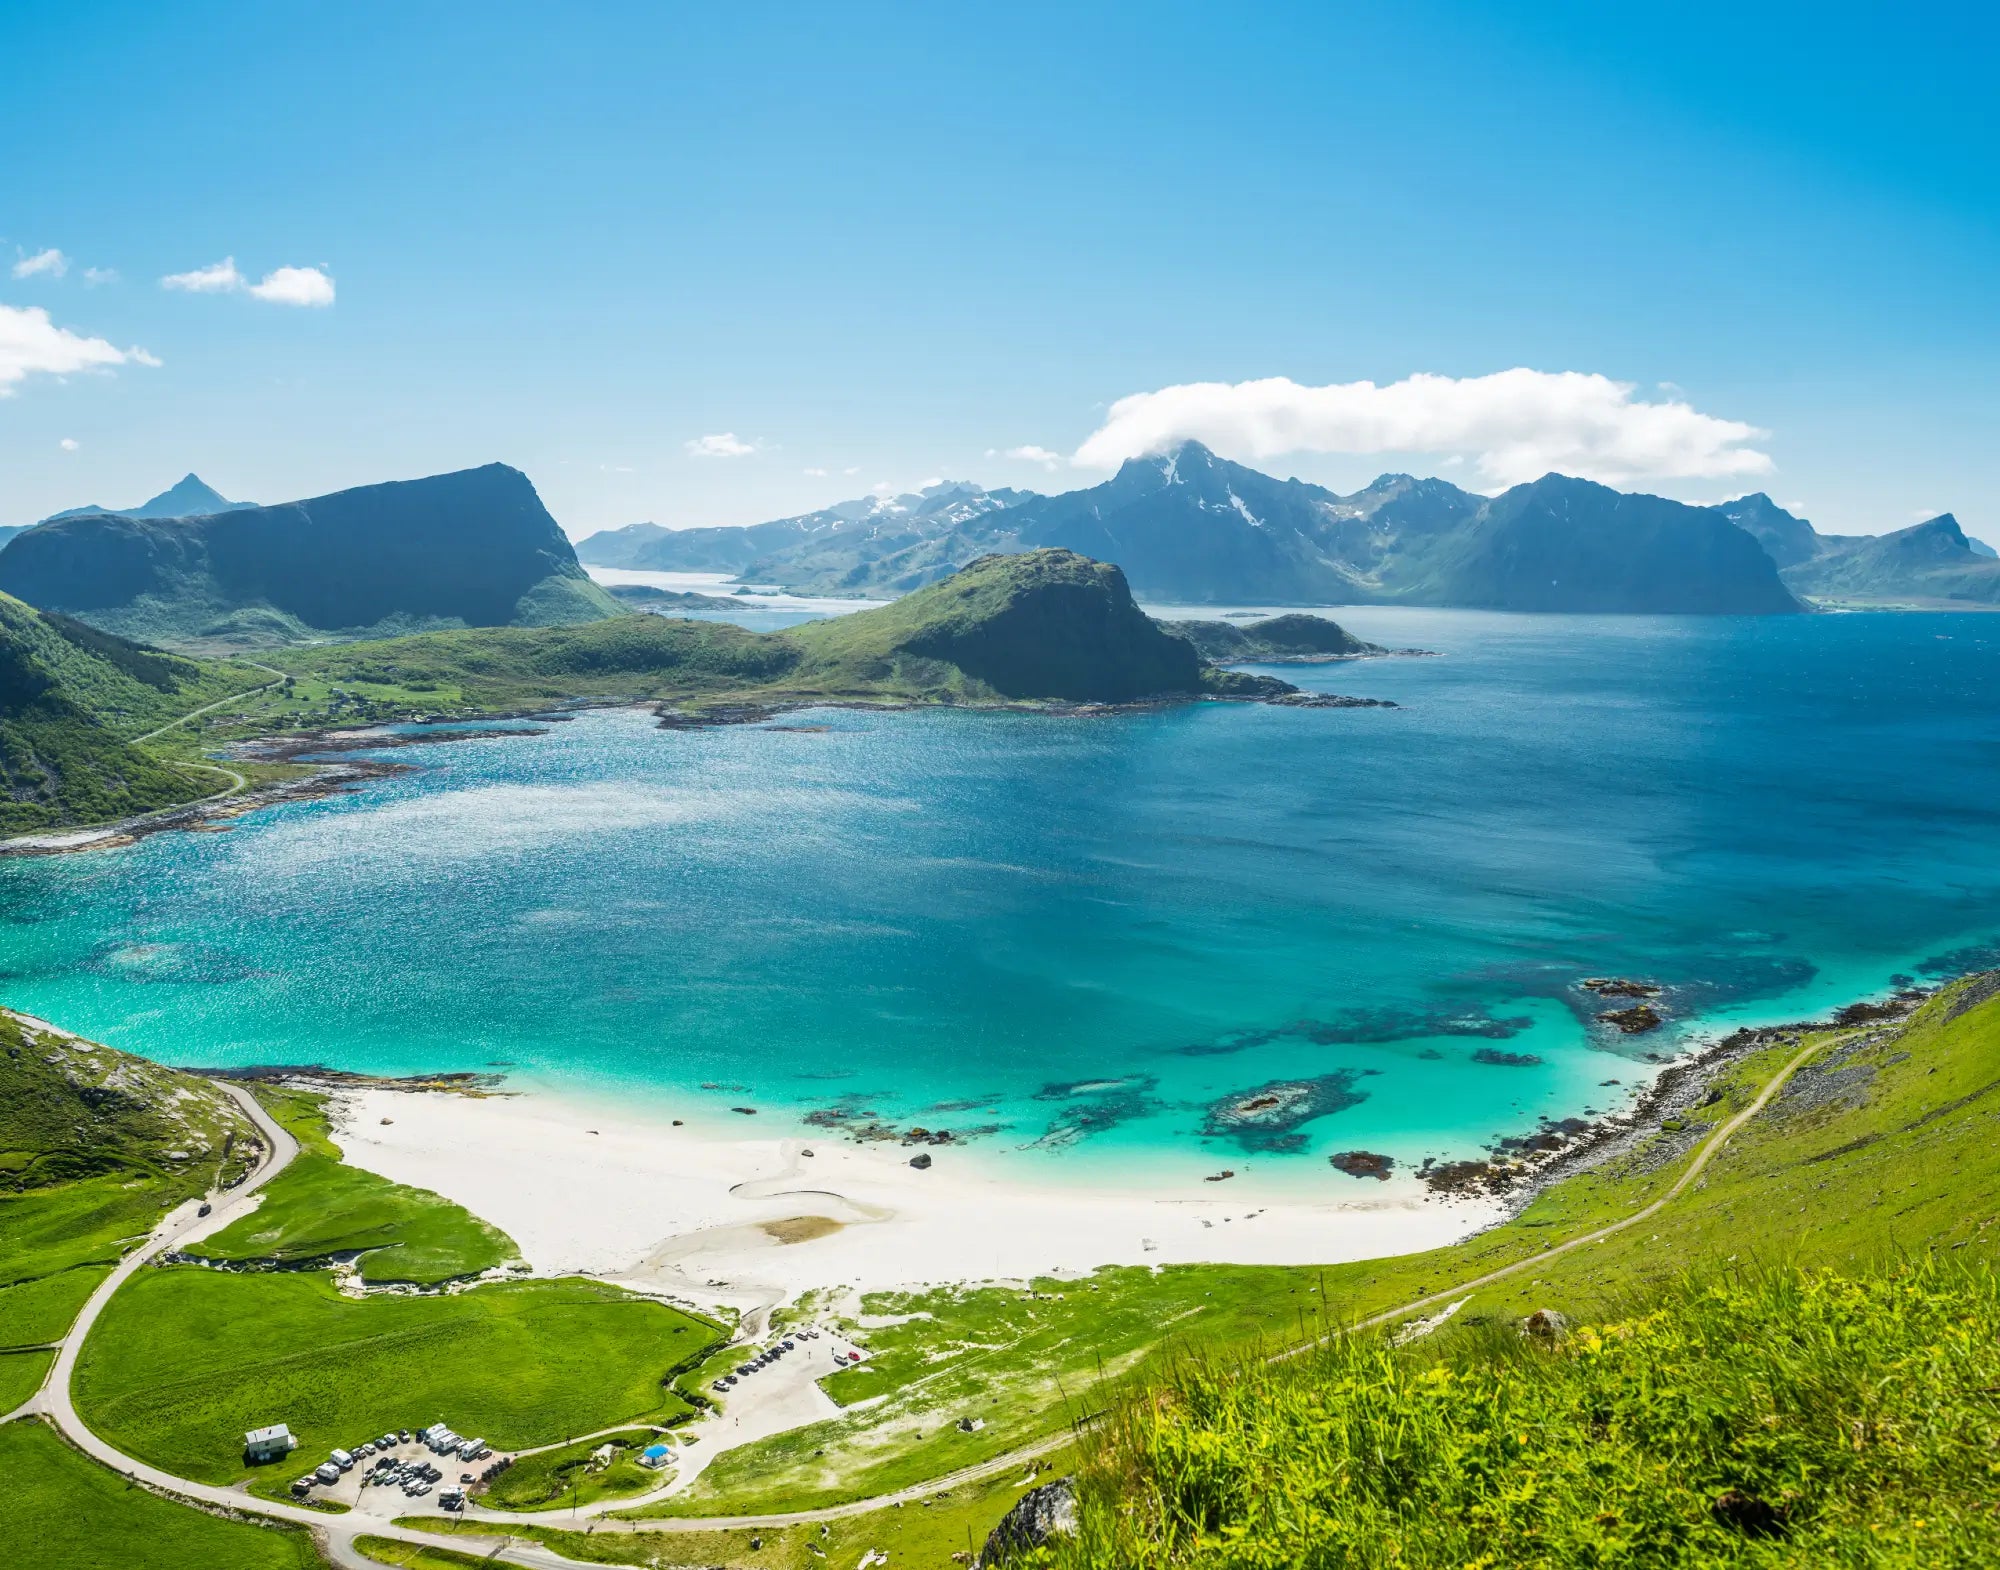 Haukland beach in Lofoten, Norway. The white sandy beach has beautiful turquoise water, and is surrounded by mountain peaks. It’s a summer day, the mountains are covered in green grass, sun is shining from a clear blue sky. 